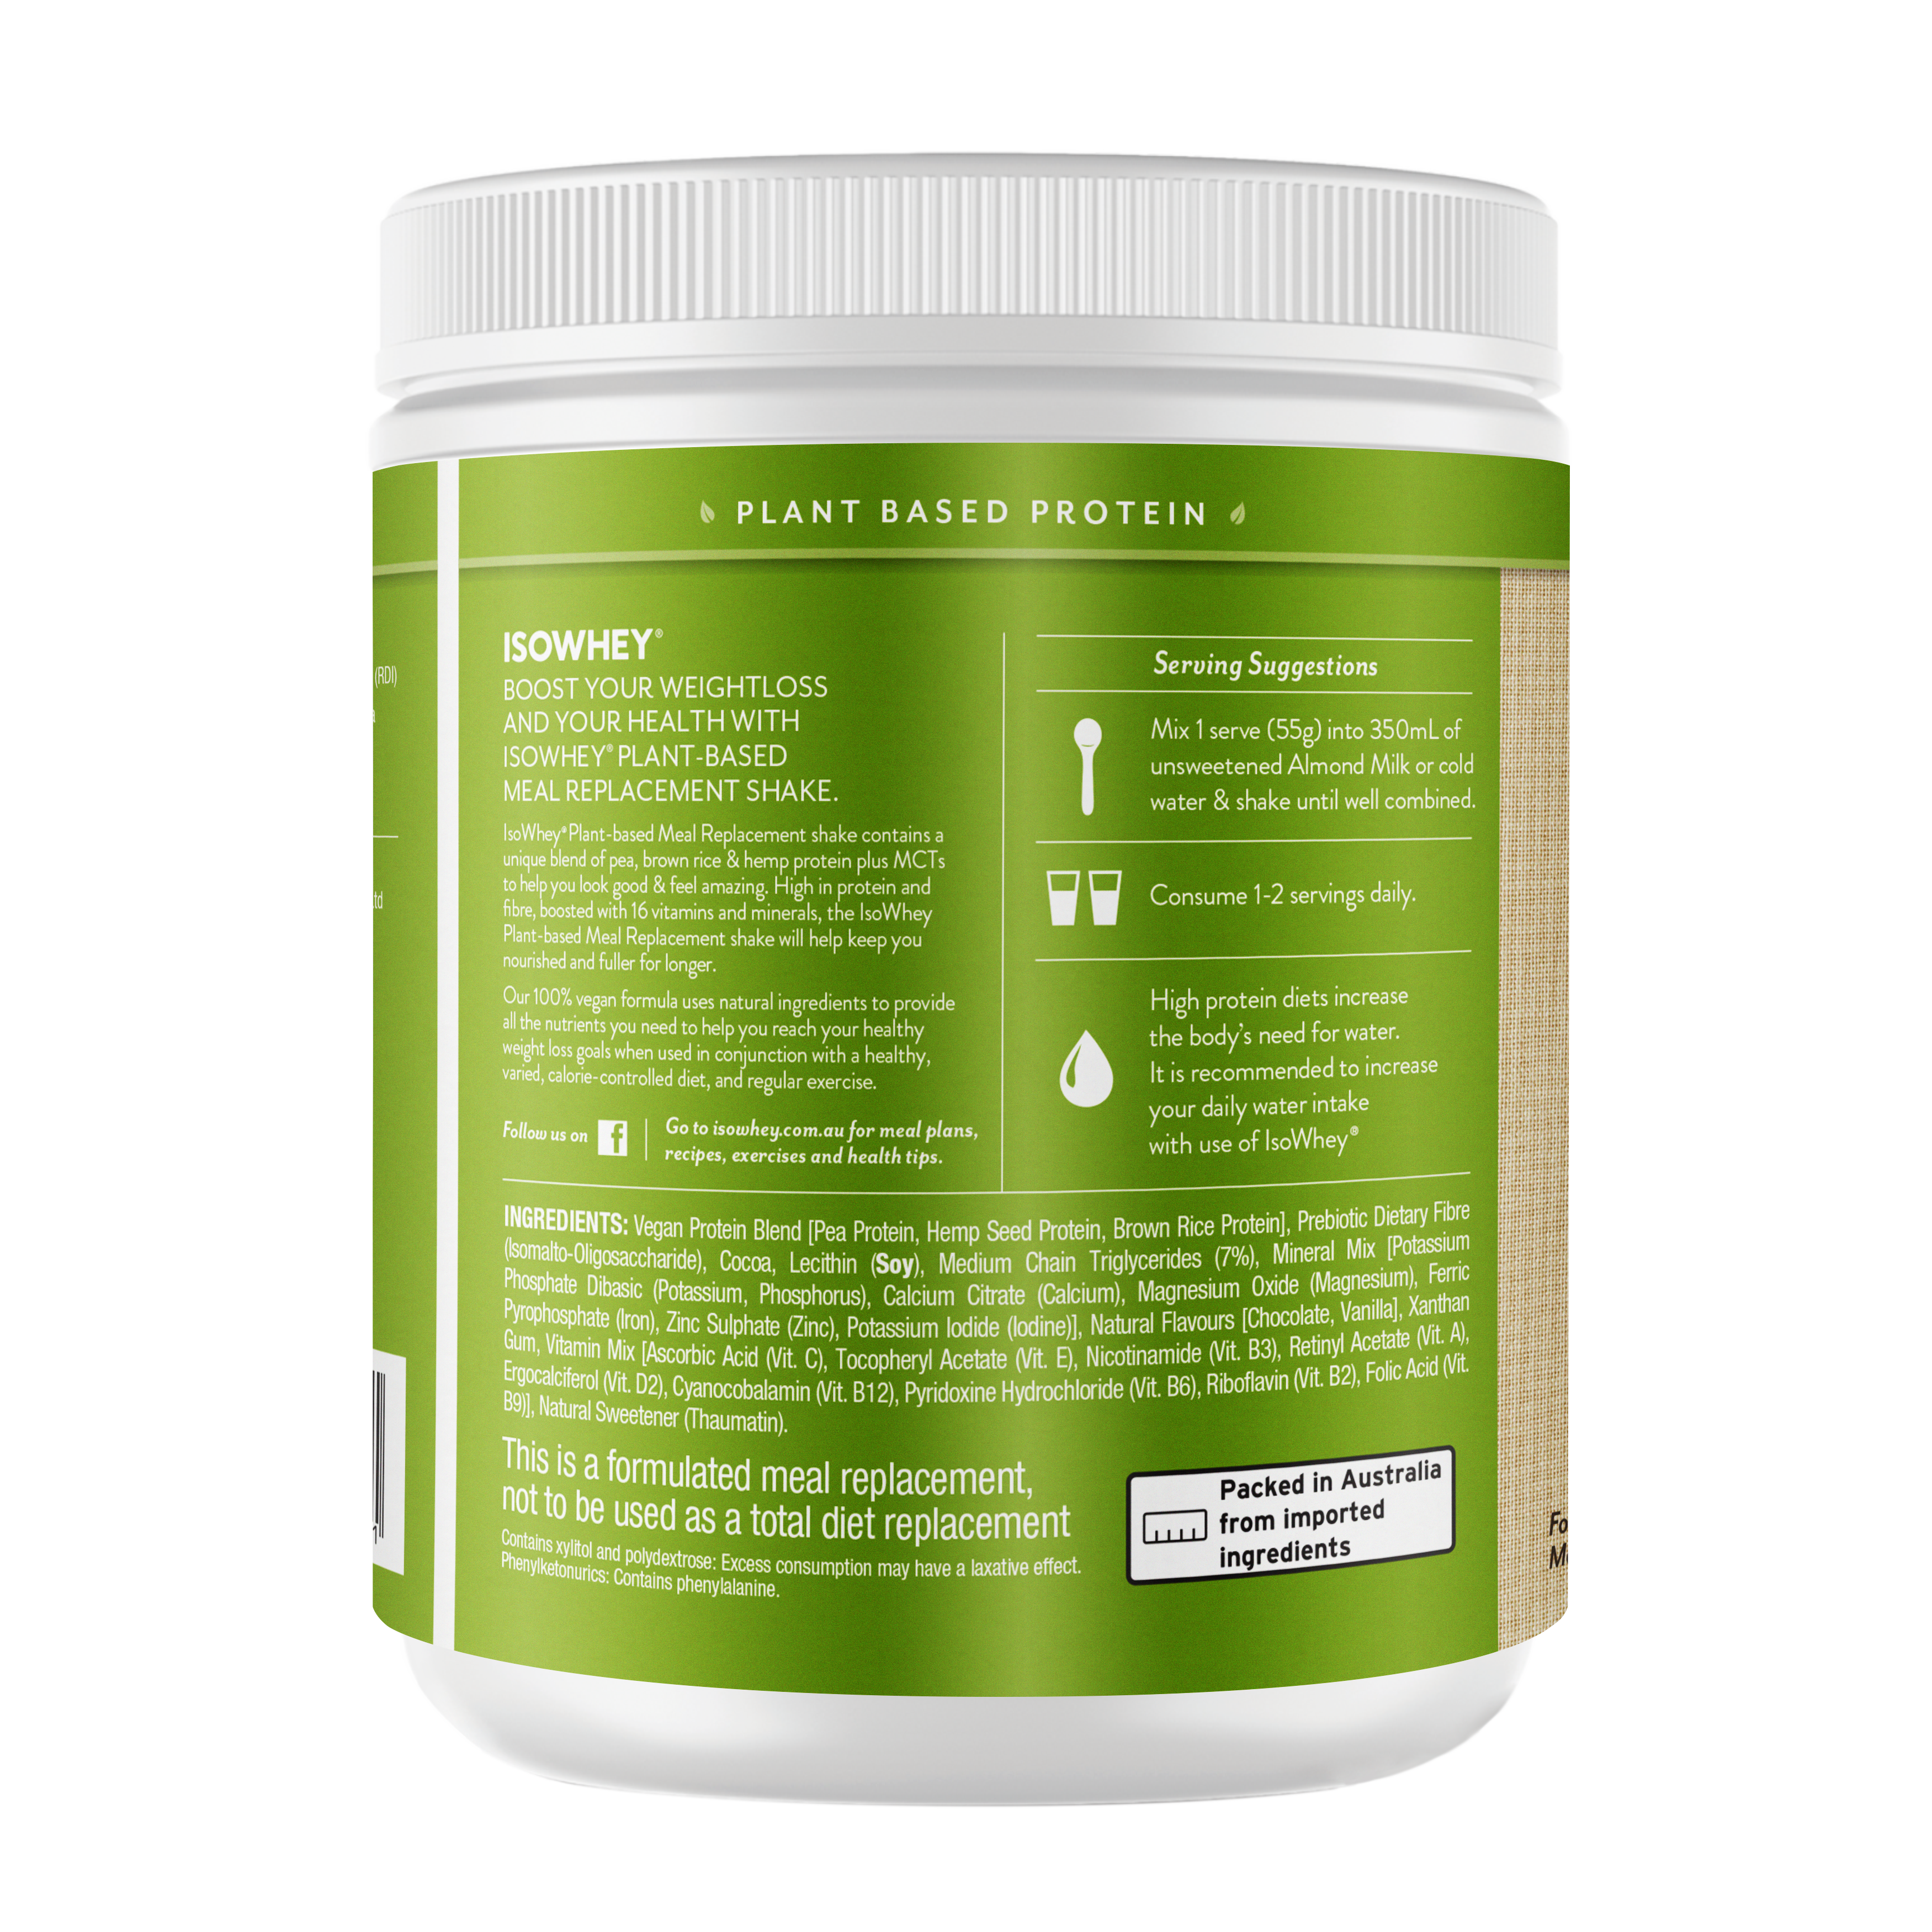 IsoWhey Plant-Based Meal Replacement Chocolate Shake 550g backshot, showing its ingredients and servicing size